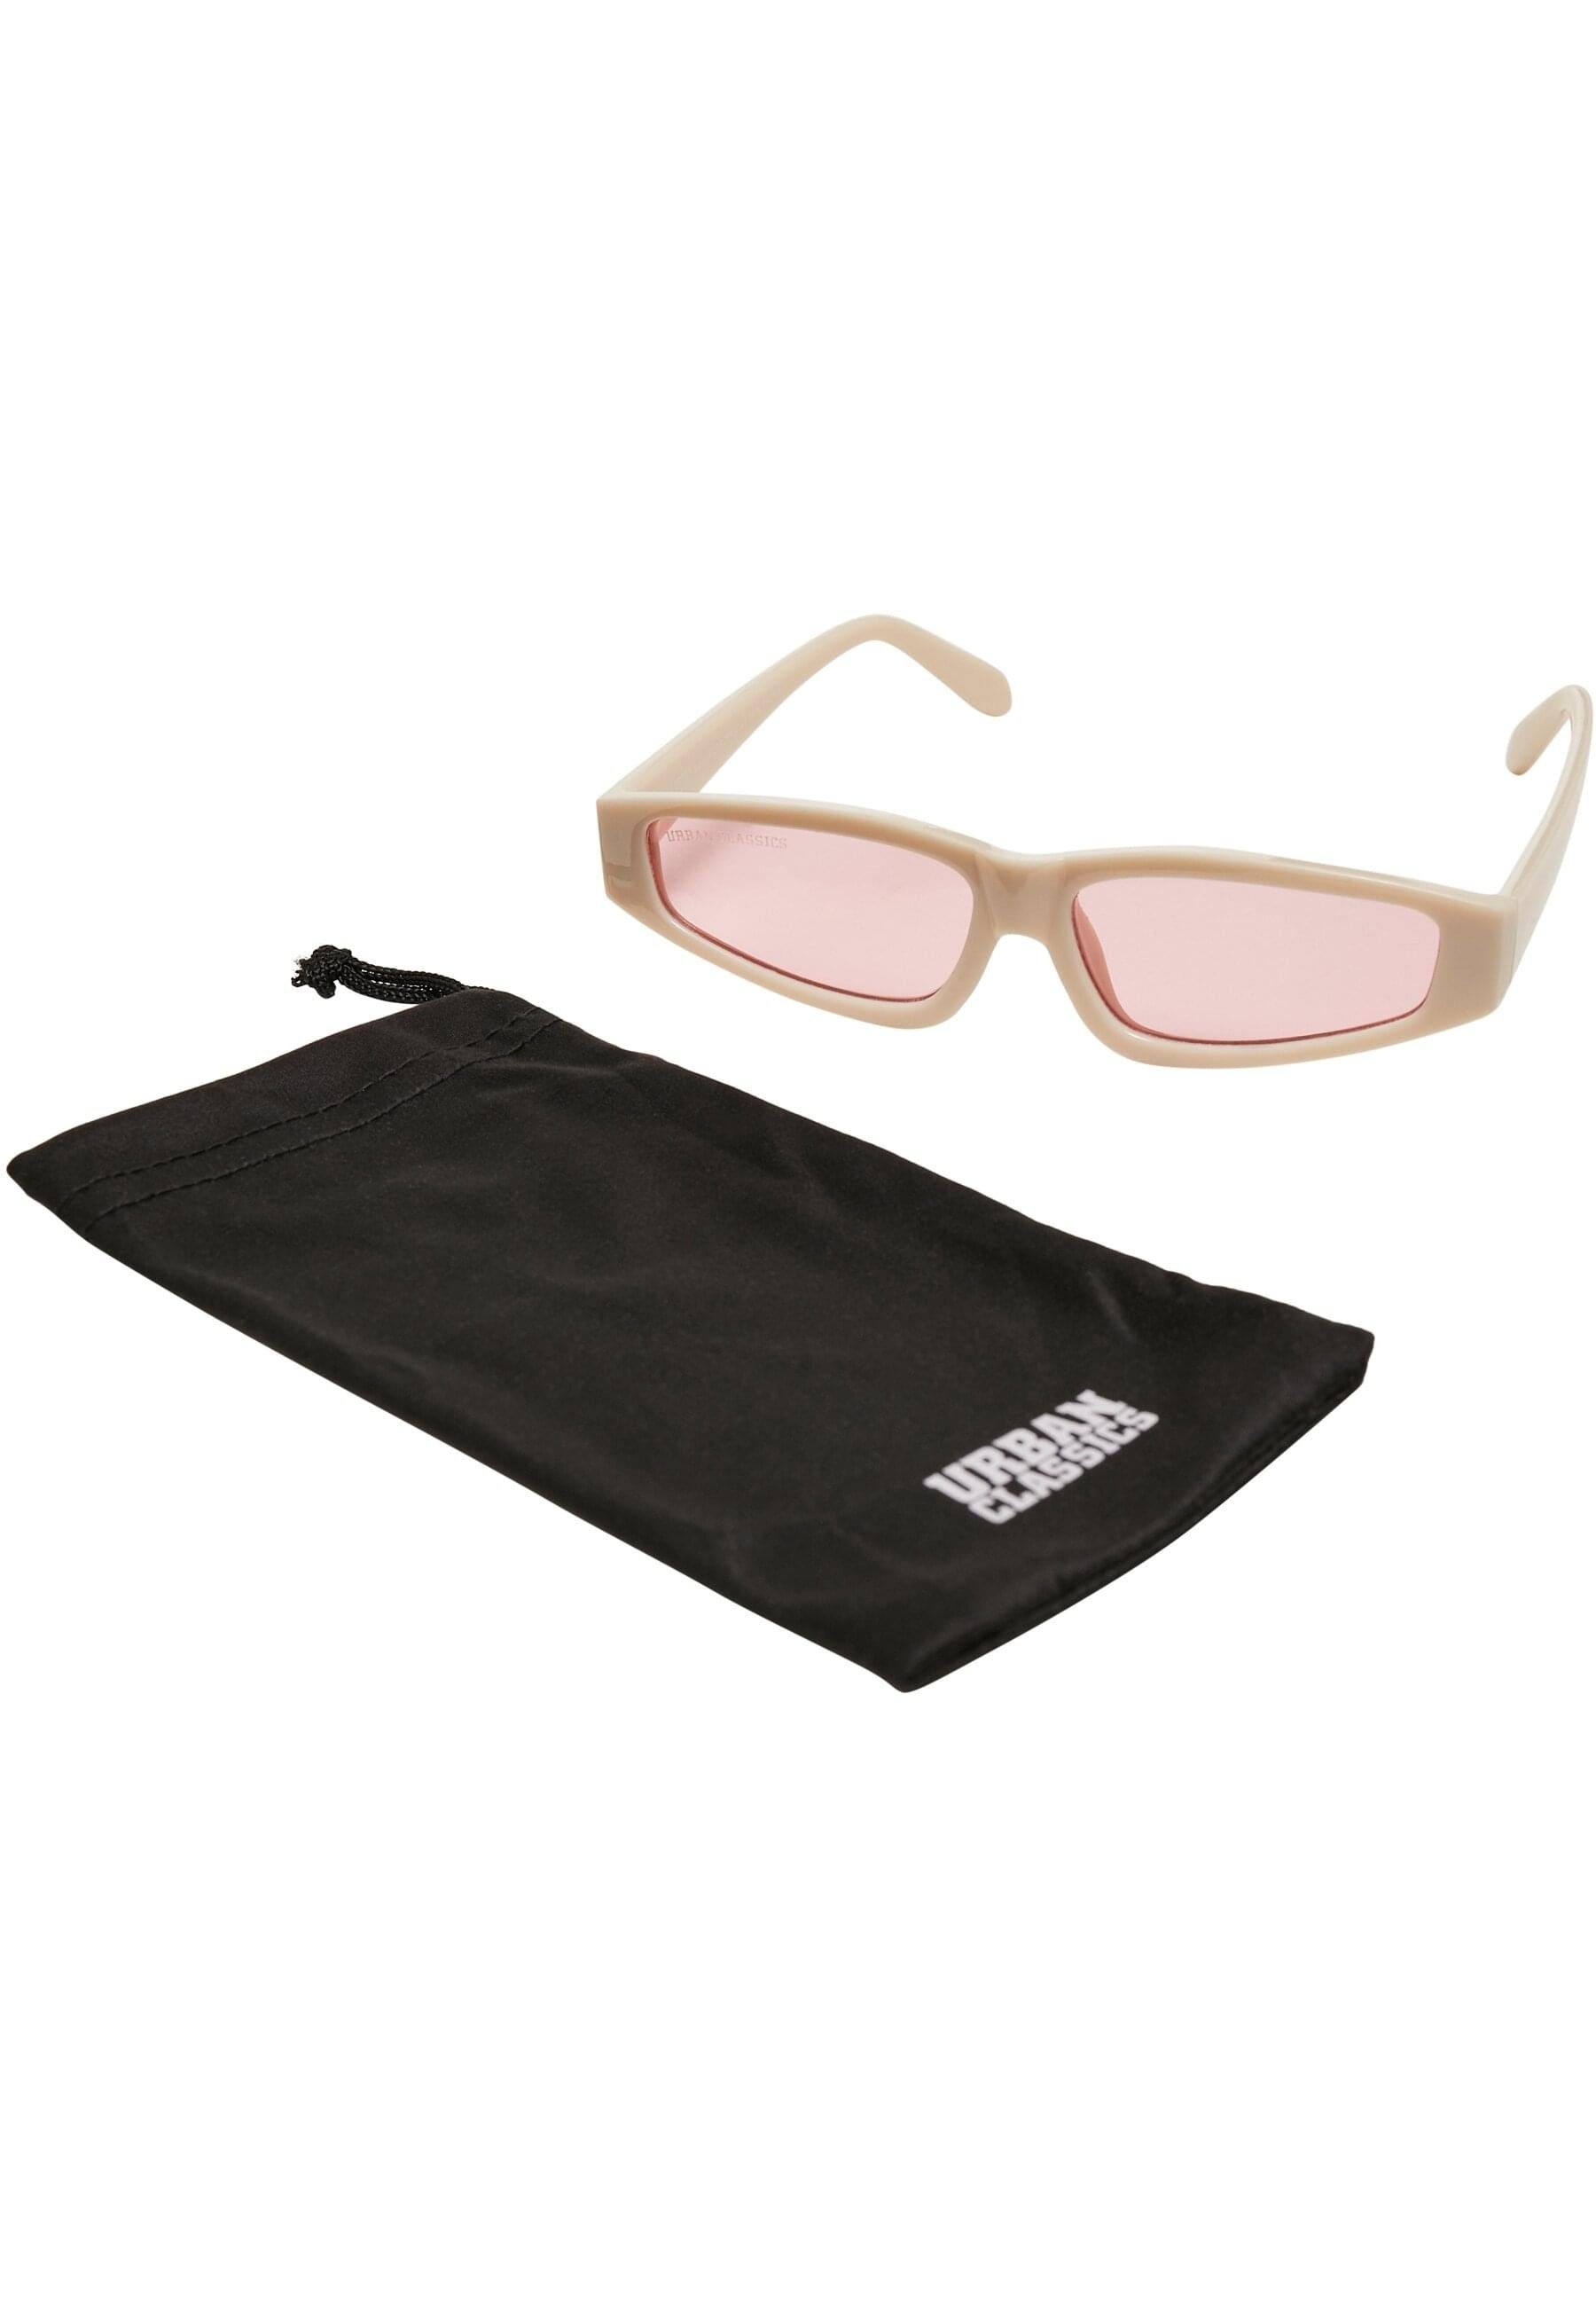 URBAN CLASSICS Sonnenbrille Unisex Sunglasses 2-Pack brown/brown+offwhite/pink Lefkada